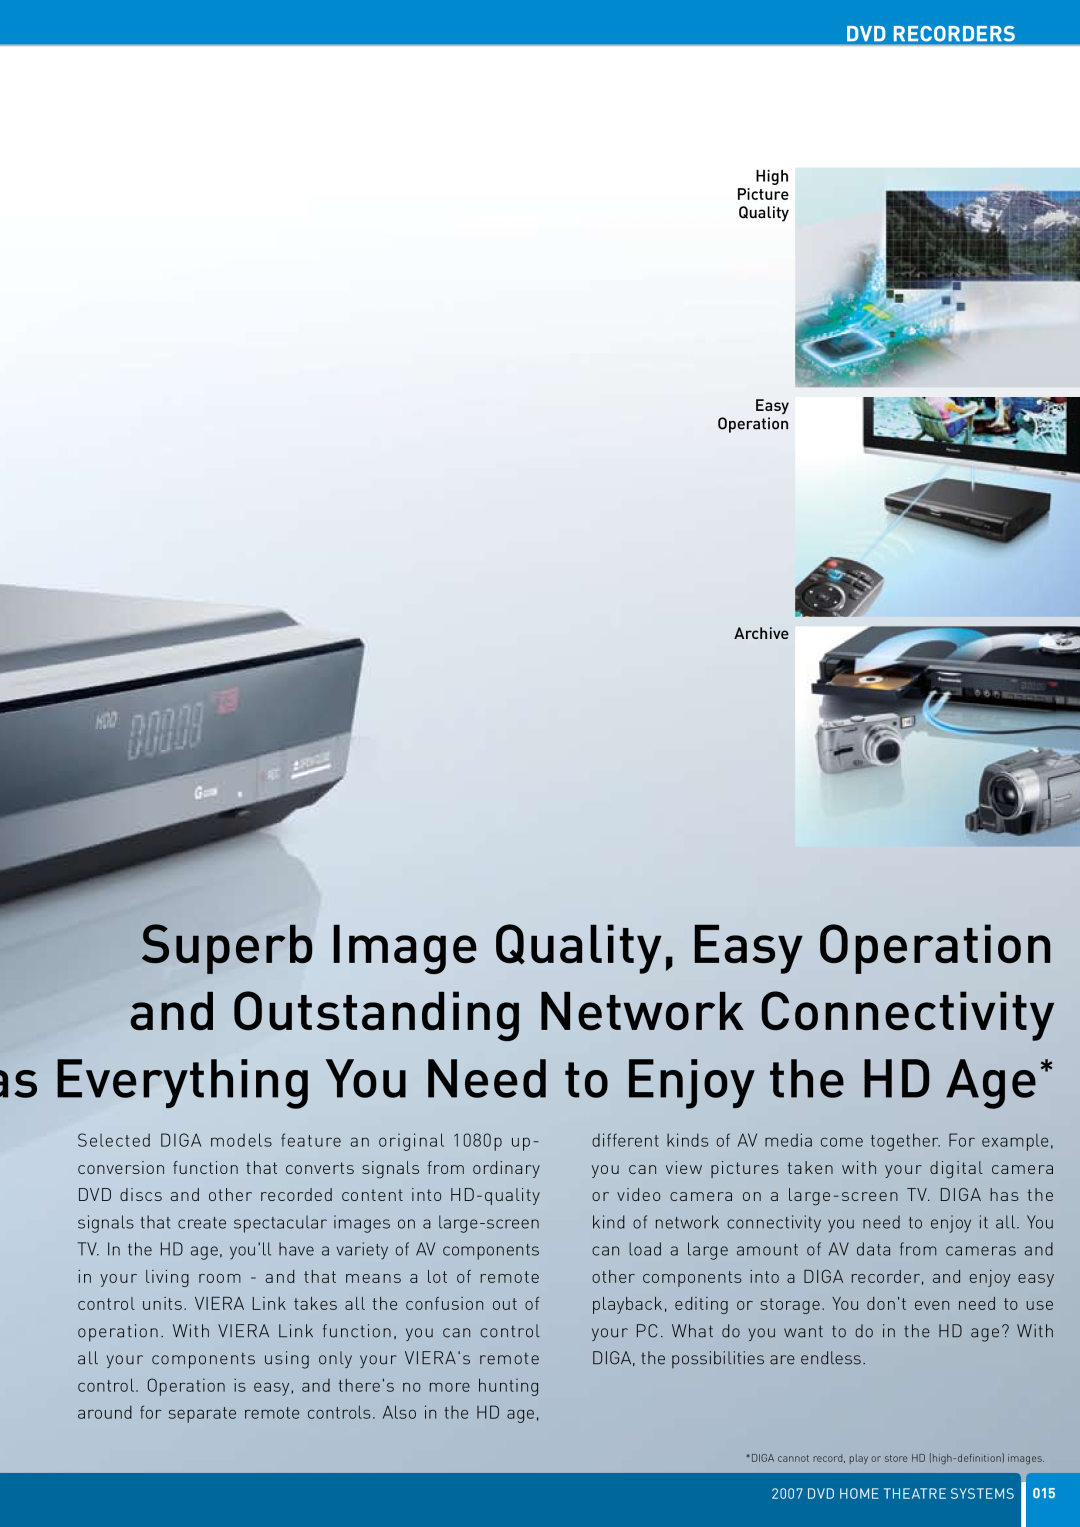 Panasonic DVD Home Theatre System manual Dvd Recorders, High Picture Quality Easy Operation Archive 